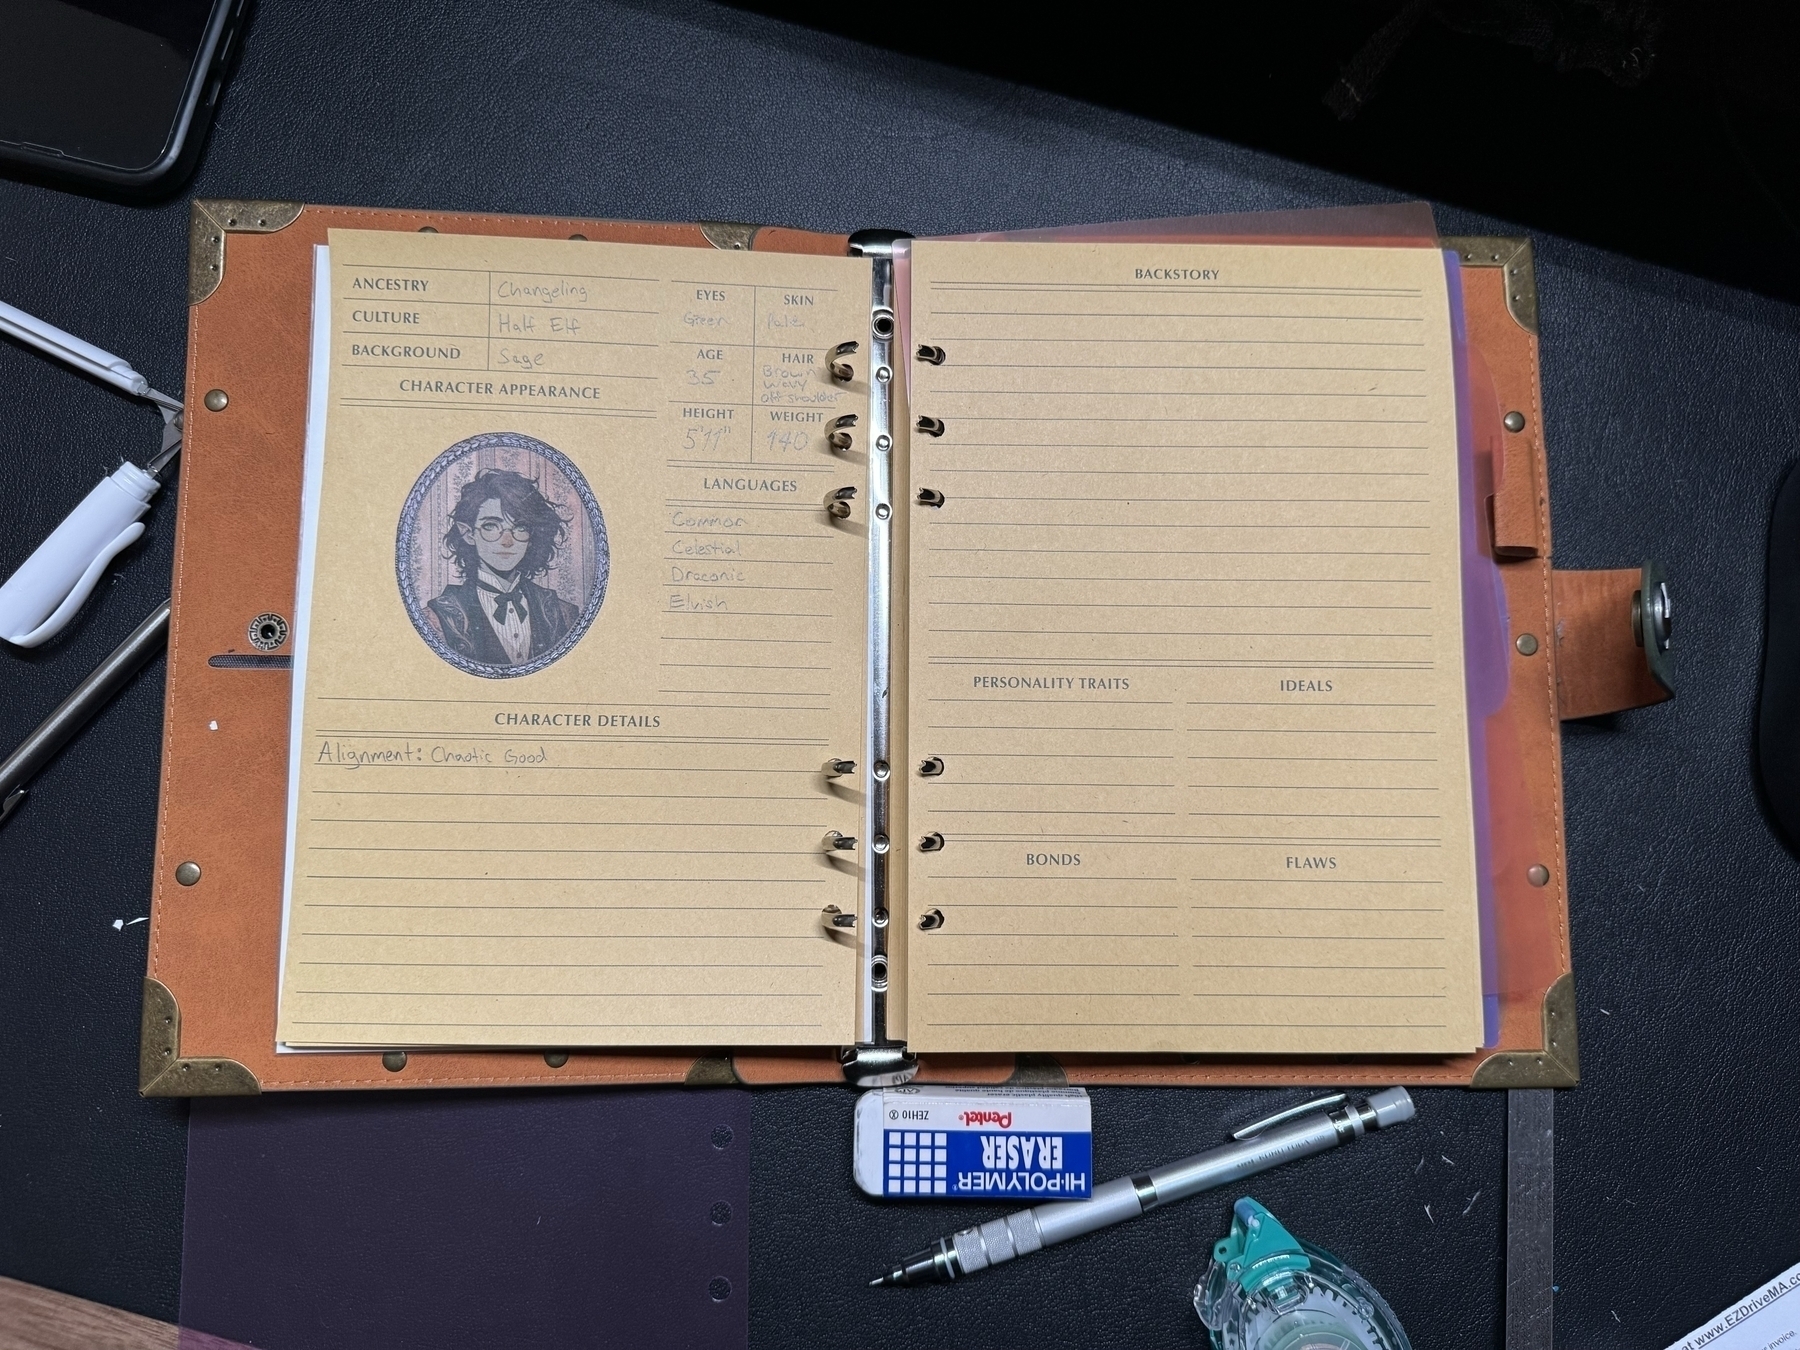 An image of an open binder with a role-playing game character sheet. On the left, there's an image of a nonbinary character with dark hair and glasses, surrounded by information like ancestry (Changeling, Half-Elf) and background (Sage). The character's alignment, "Chaotic Good," is noted below. The right page, meant for the character's backstory and traits, is blank. A pencil, a roll of double sided tape, and an eraser lie on the desk (which is a horrible mess just out of frame).